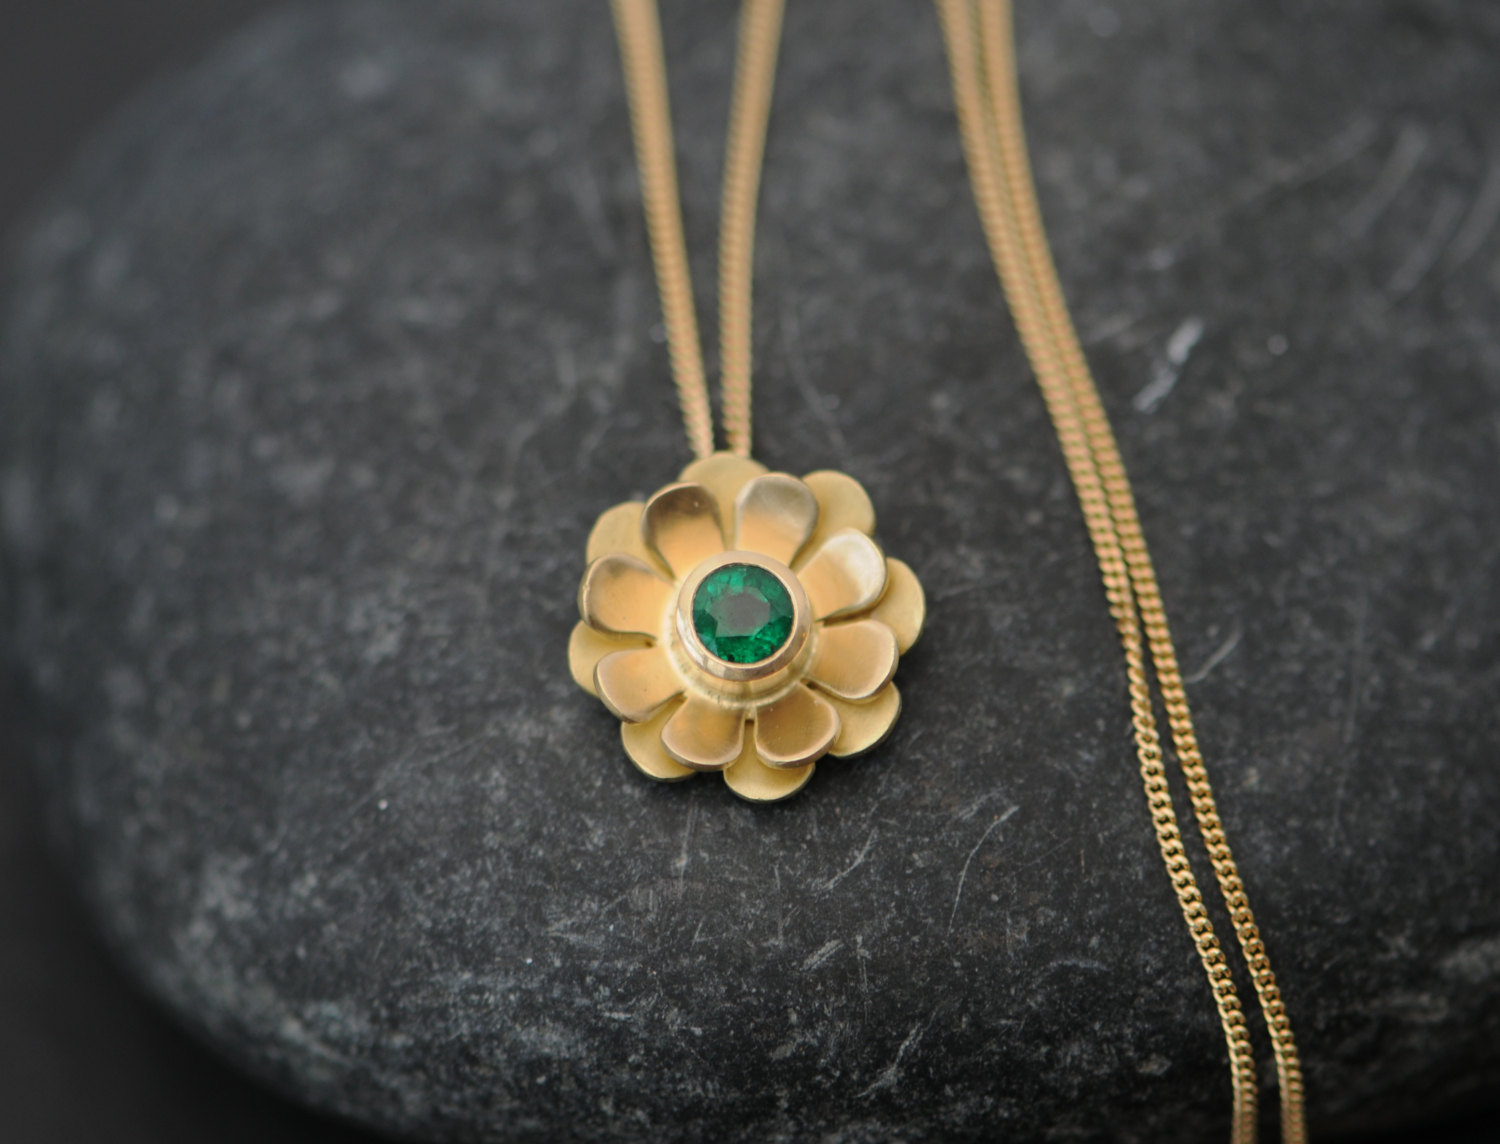 Beautiful emerald daisy pendant necklace, set in 18k gold. This gold and emerald necklace is designed and handmade by William White in Cornwall, UK.